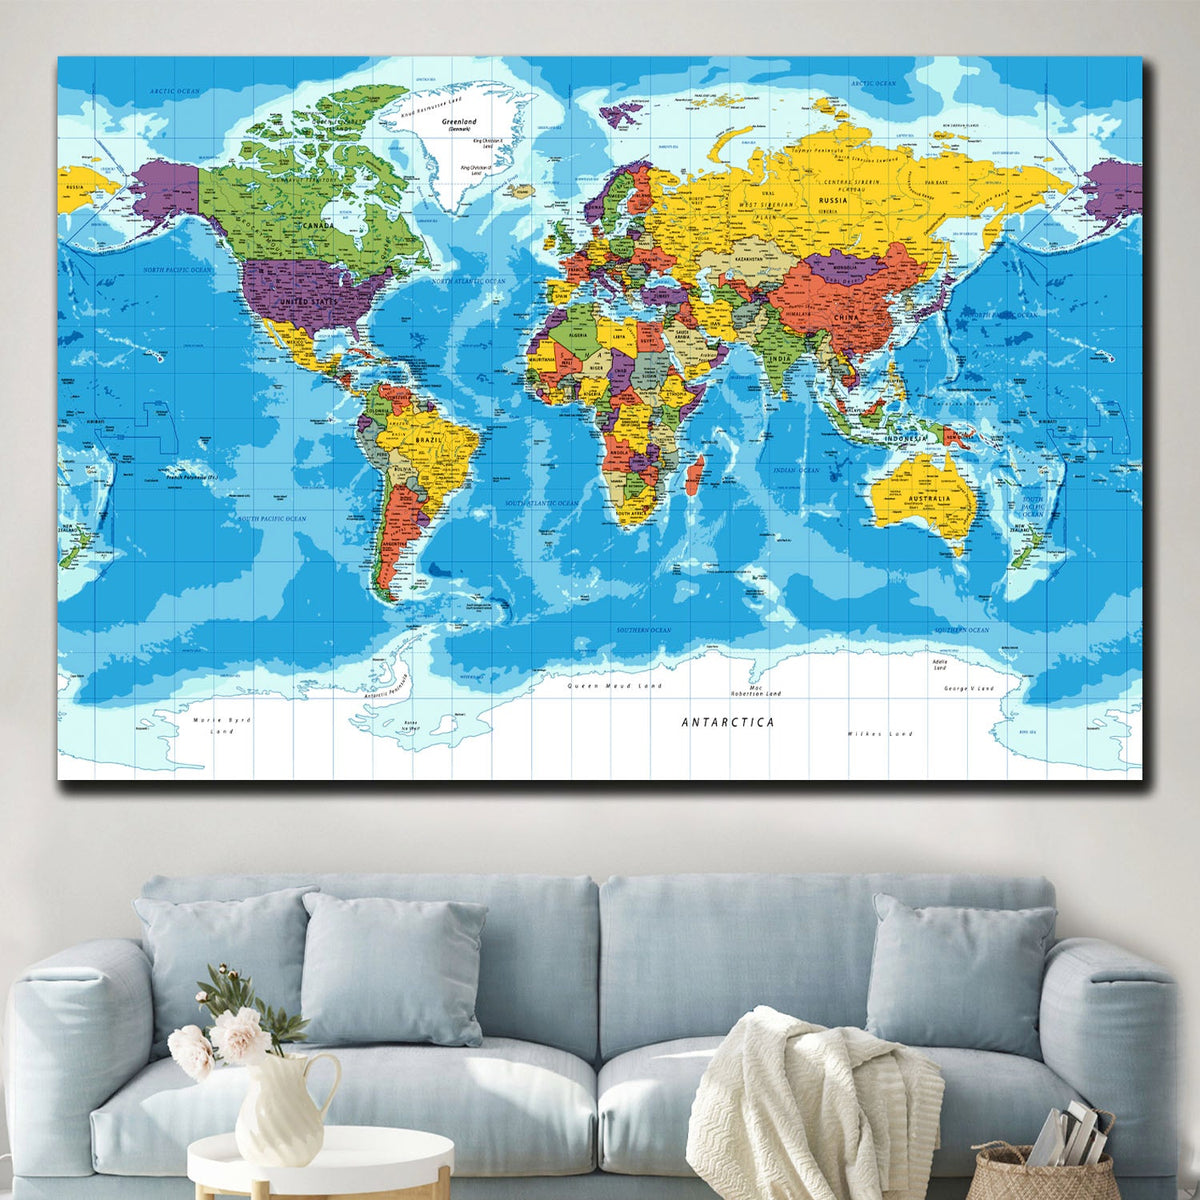 https://cdn.shopify.com/s/files/1/0387/9986/8044/products/MapoftheWorldinColourCanvasArtprintStretched-2.jpg